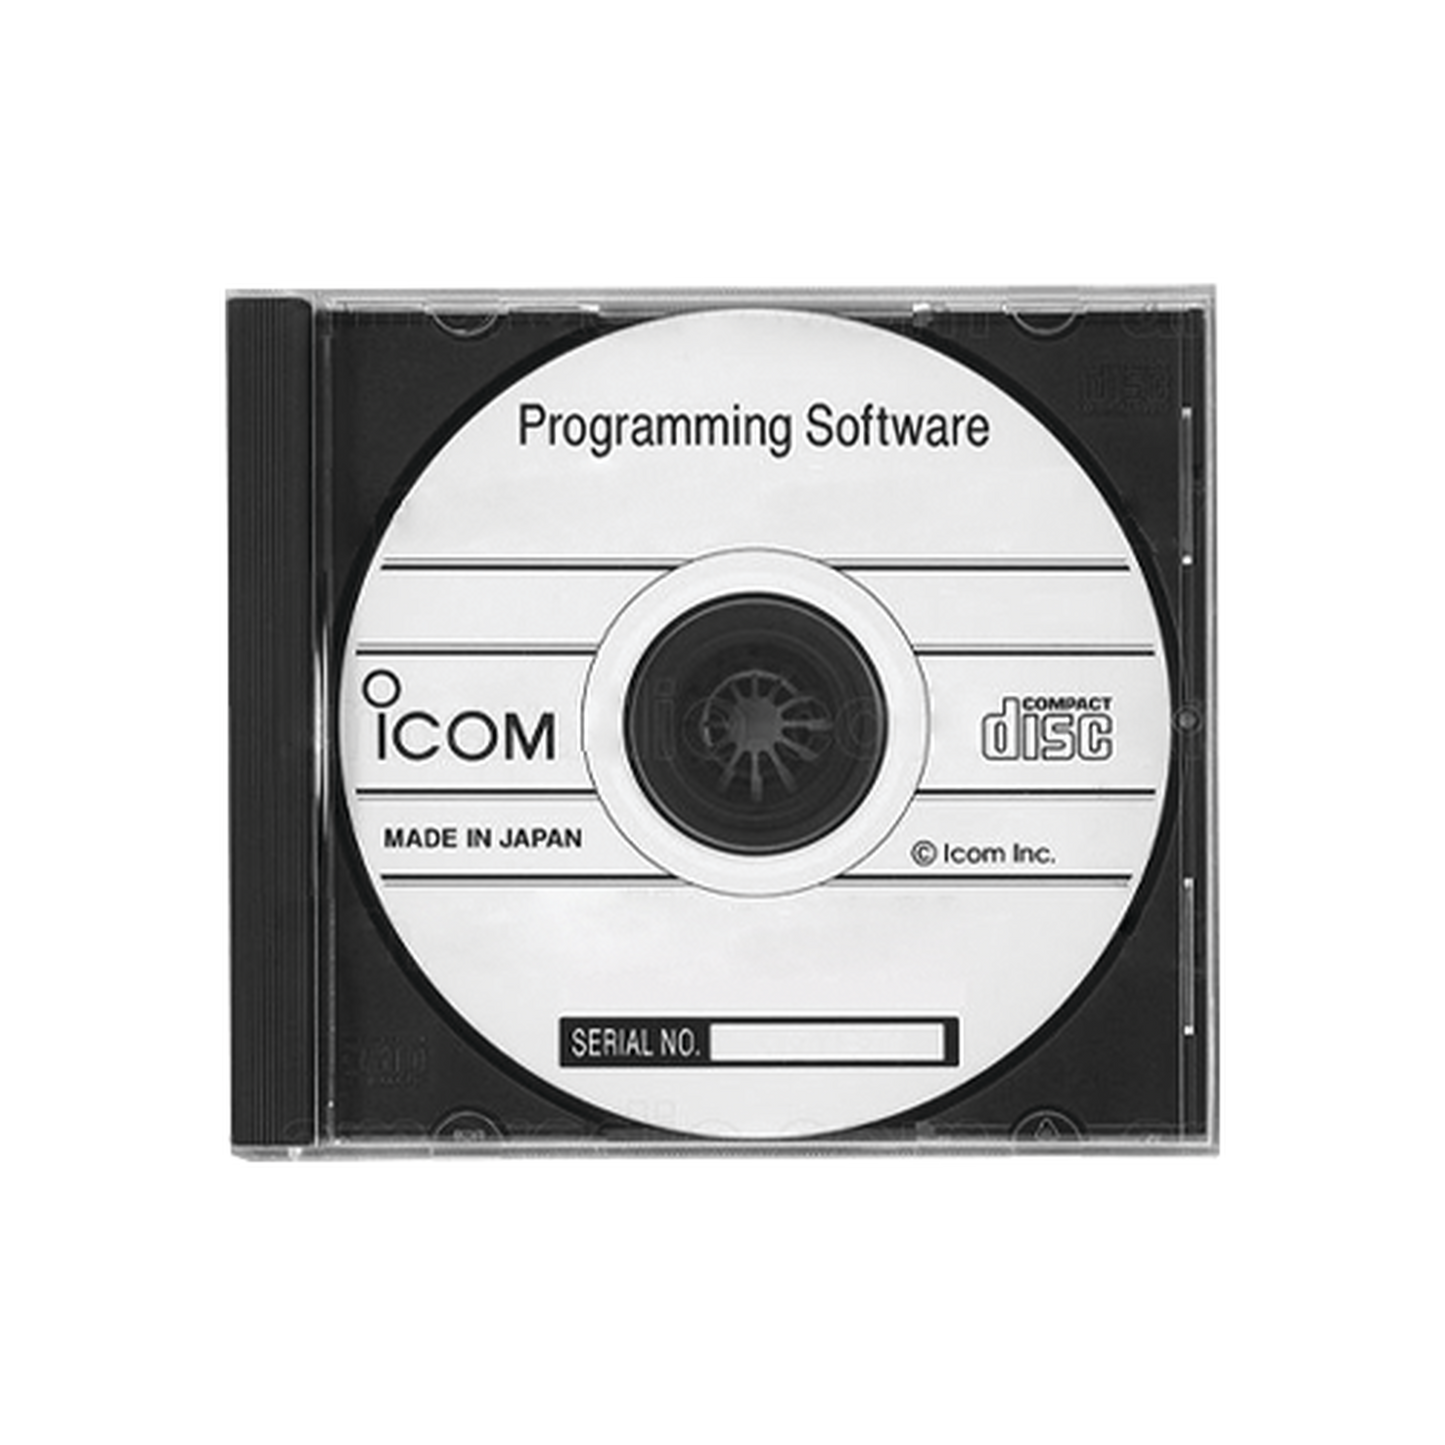 Programming software for the F1000/2000 series